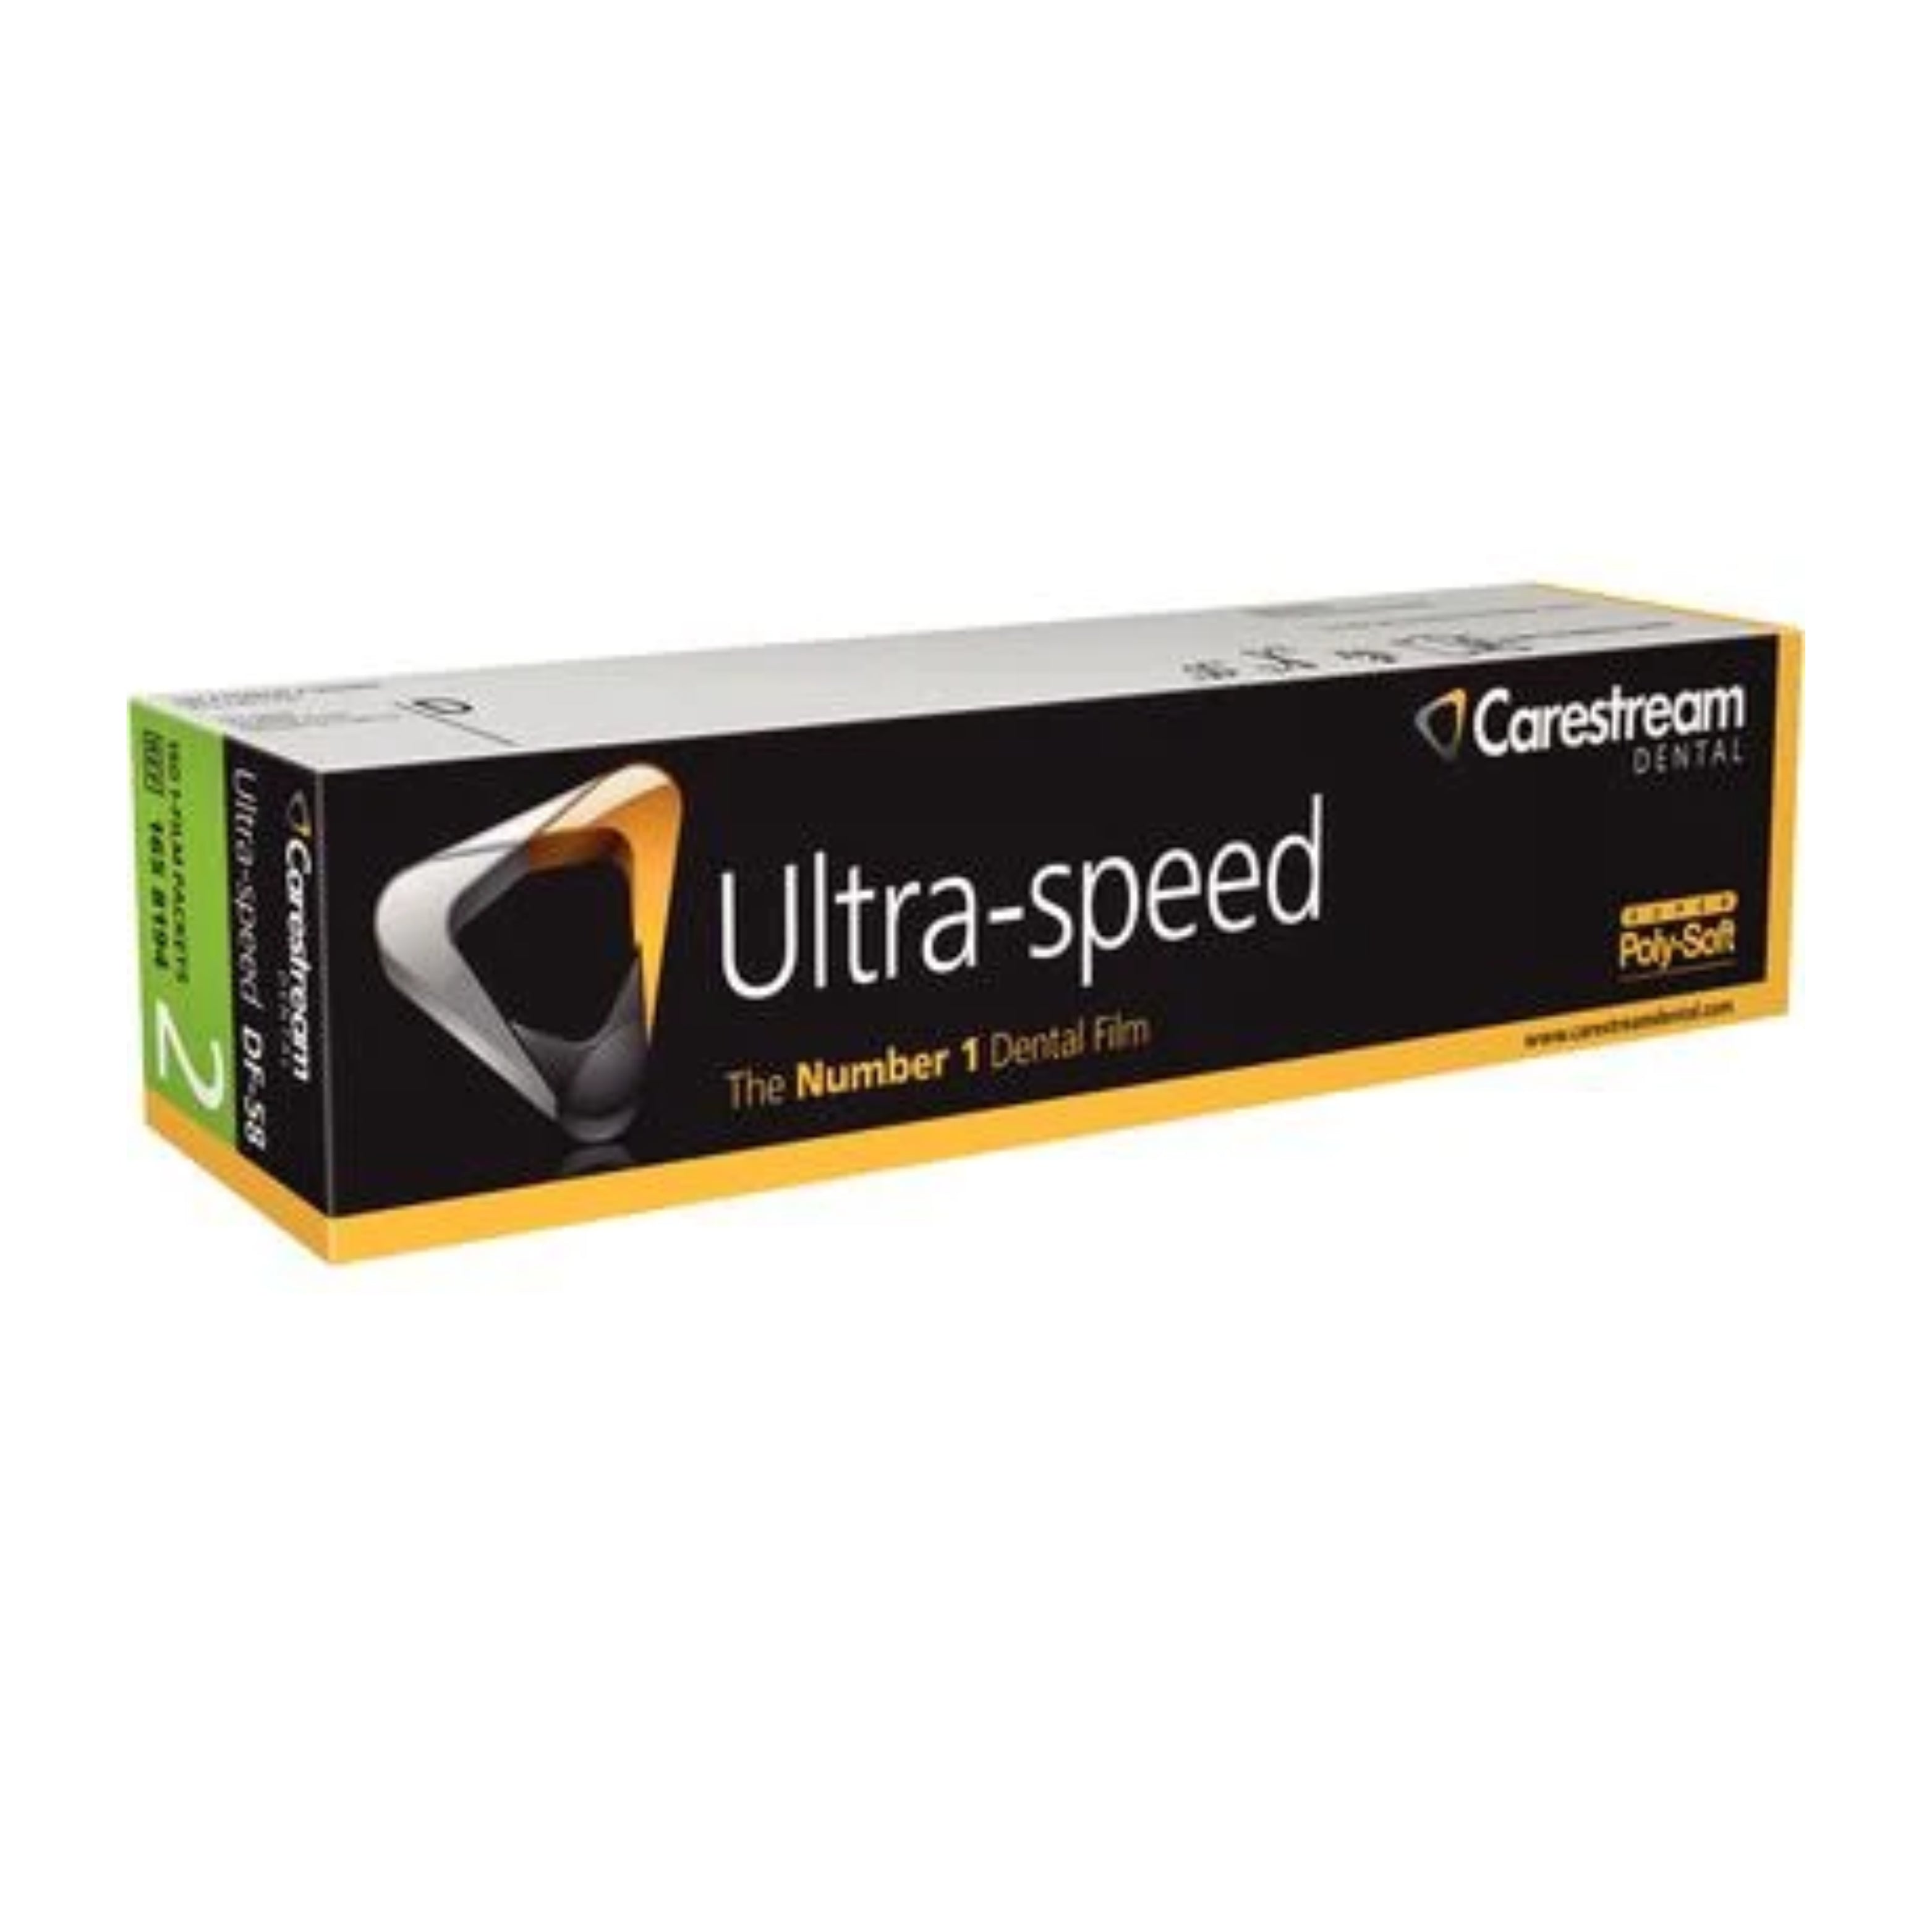 Carestream Ultra-speed DF-58 #2 Dental X-Ray Film - Periapical Film for Accurate Diagnoses 150/Box